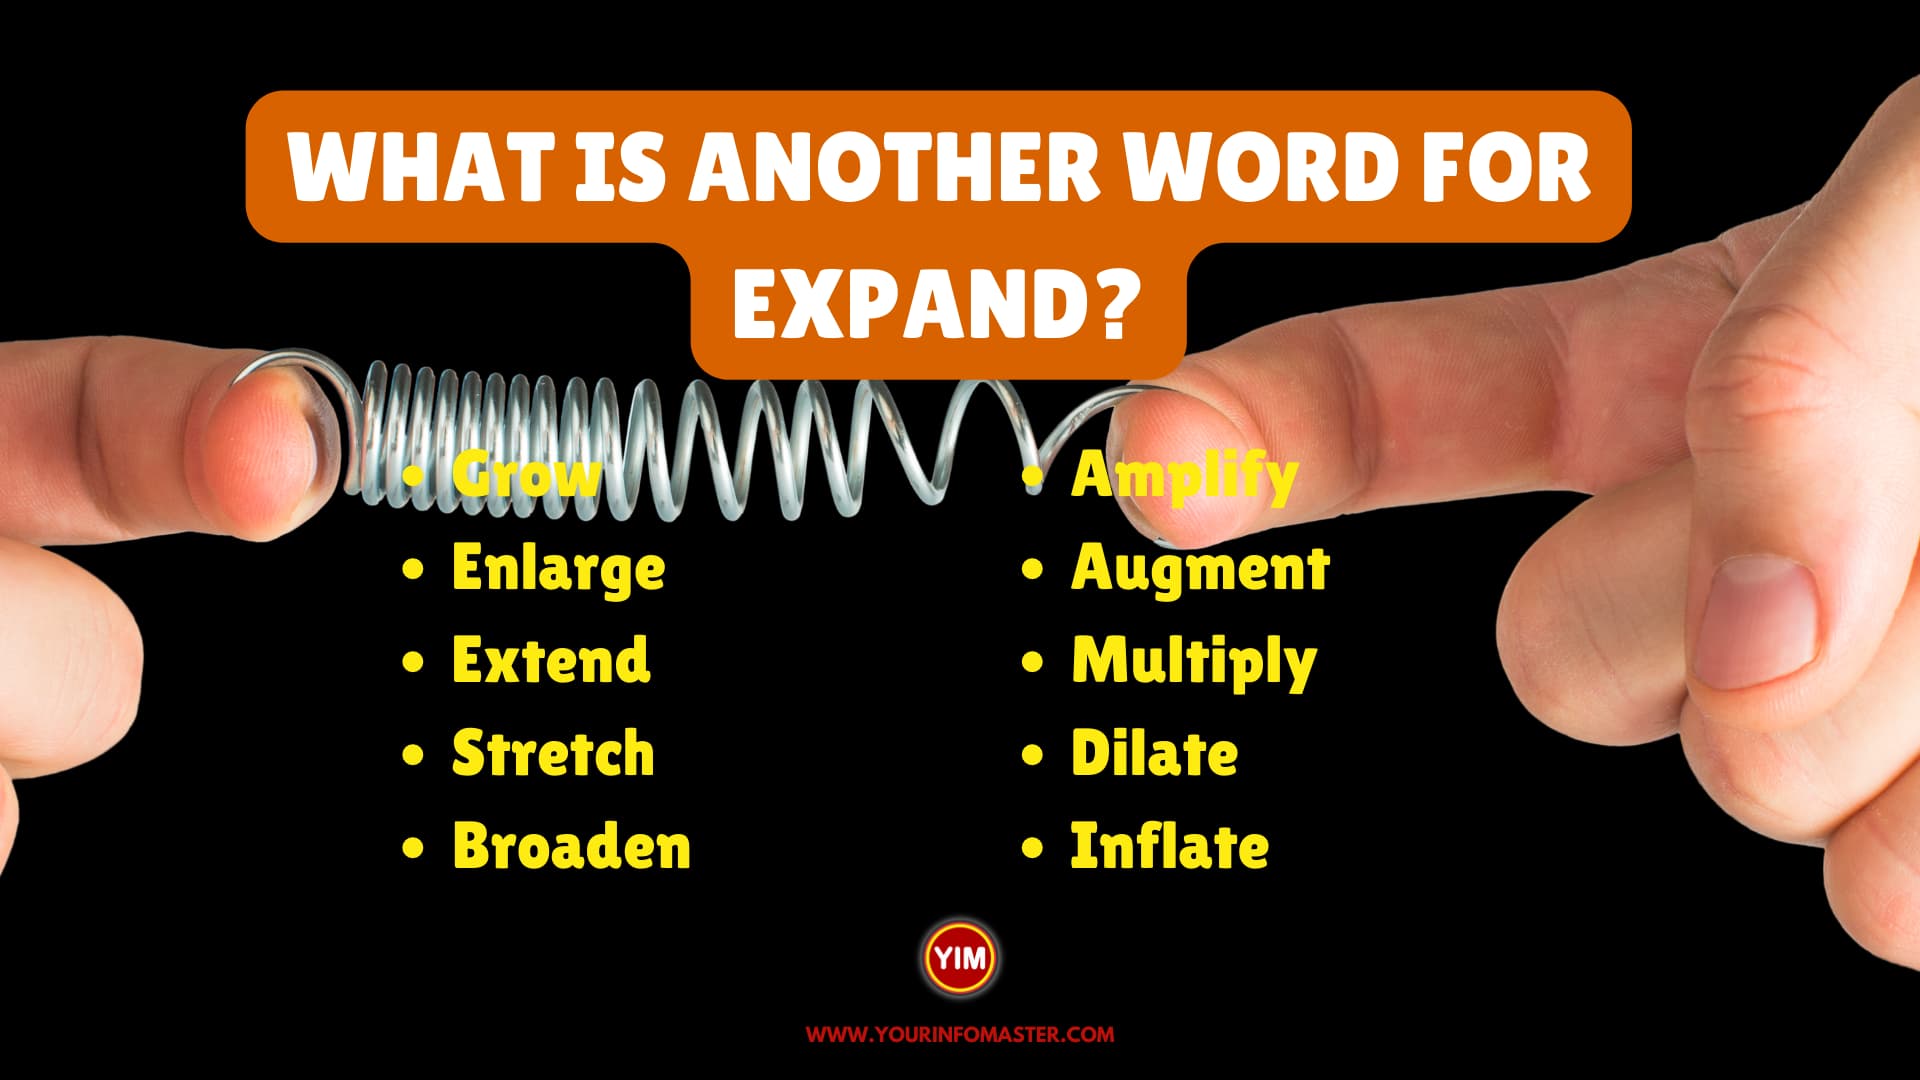 What is another word for Expand